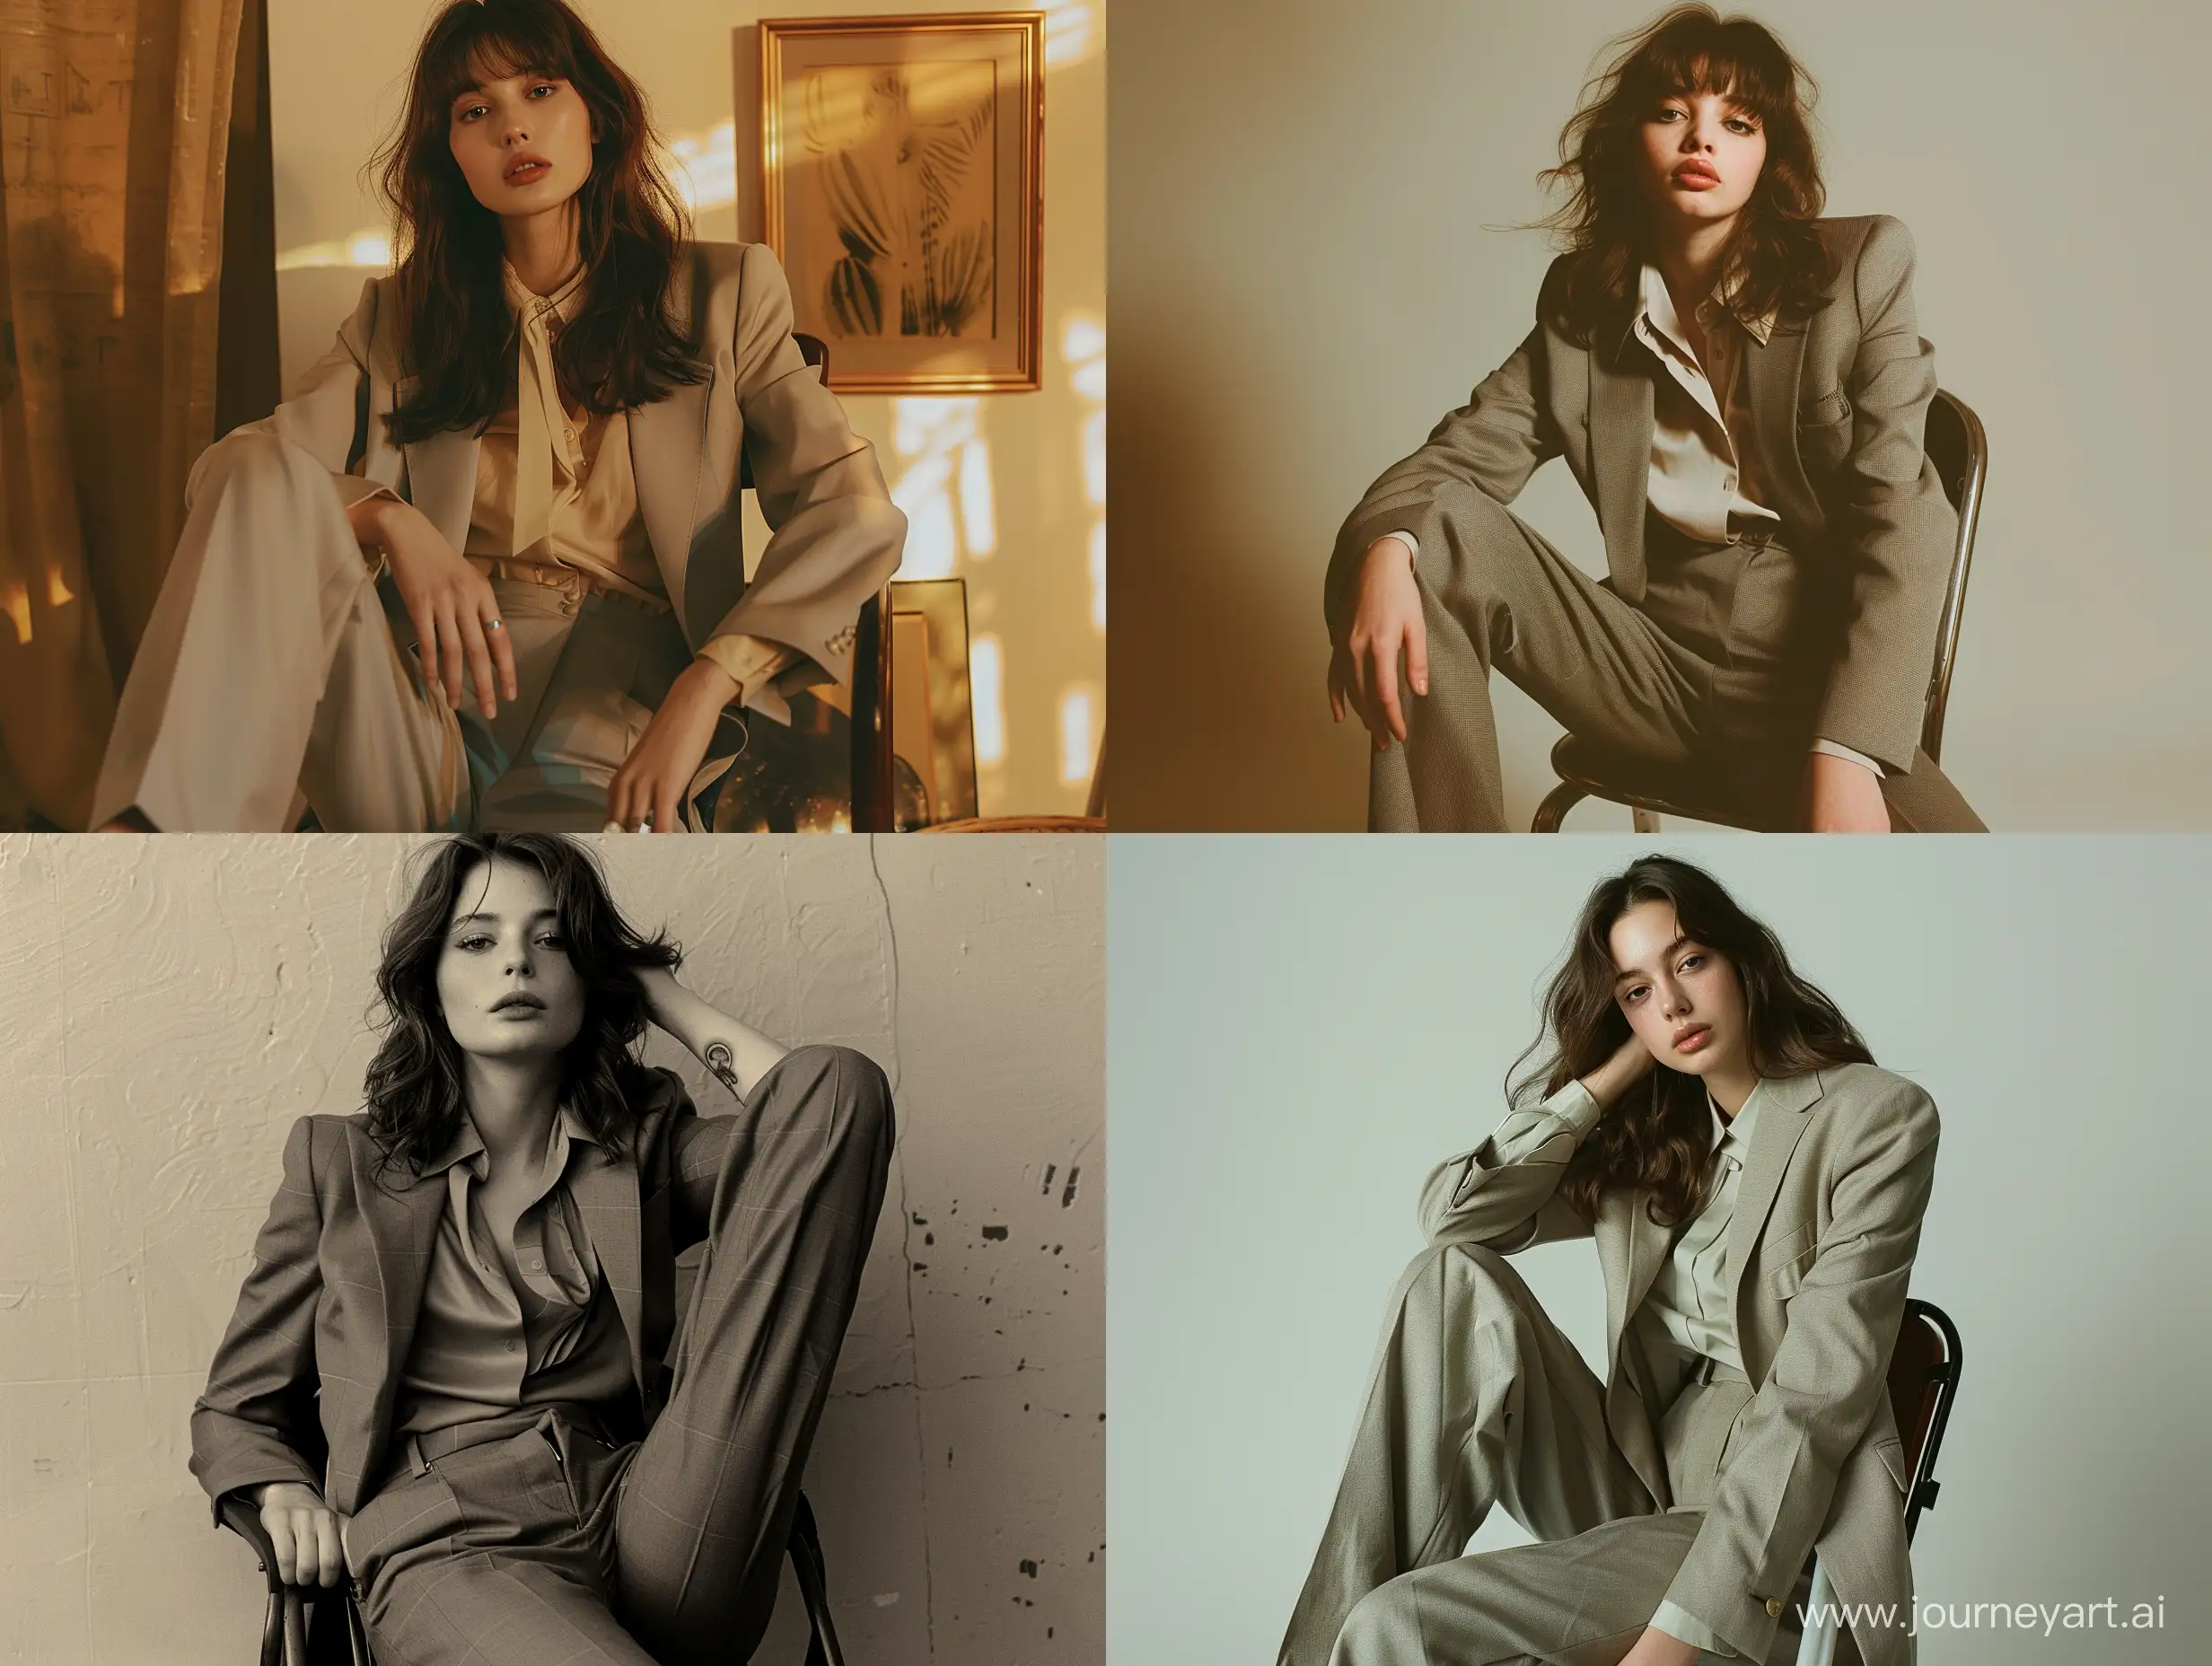 High resolution fashion photo of brunette girl, full body shot, wearing a suit pants and simple blouse,sit on chair, super casual, everyday attire, in the style of jennie, mysterious nocturnal scenes, mischievous motif, album covers, flickr